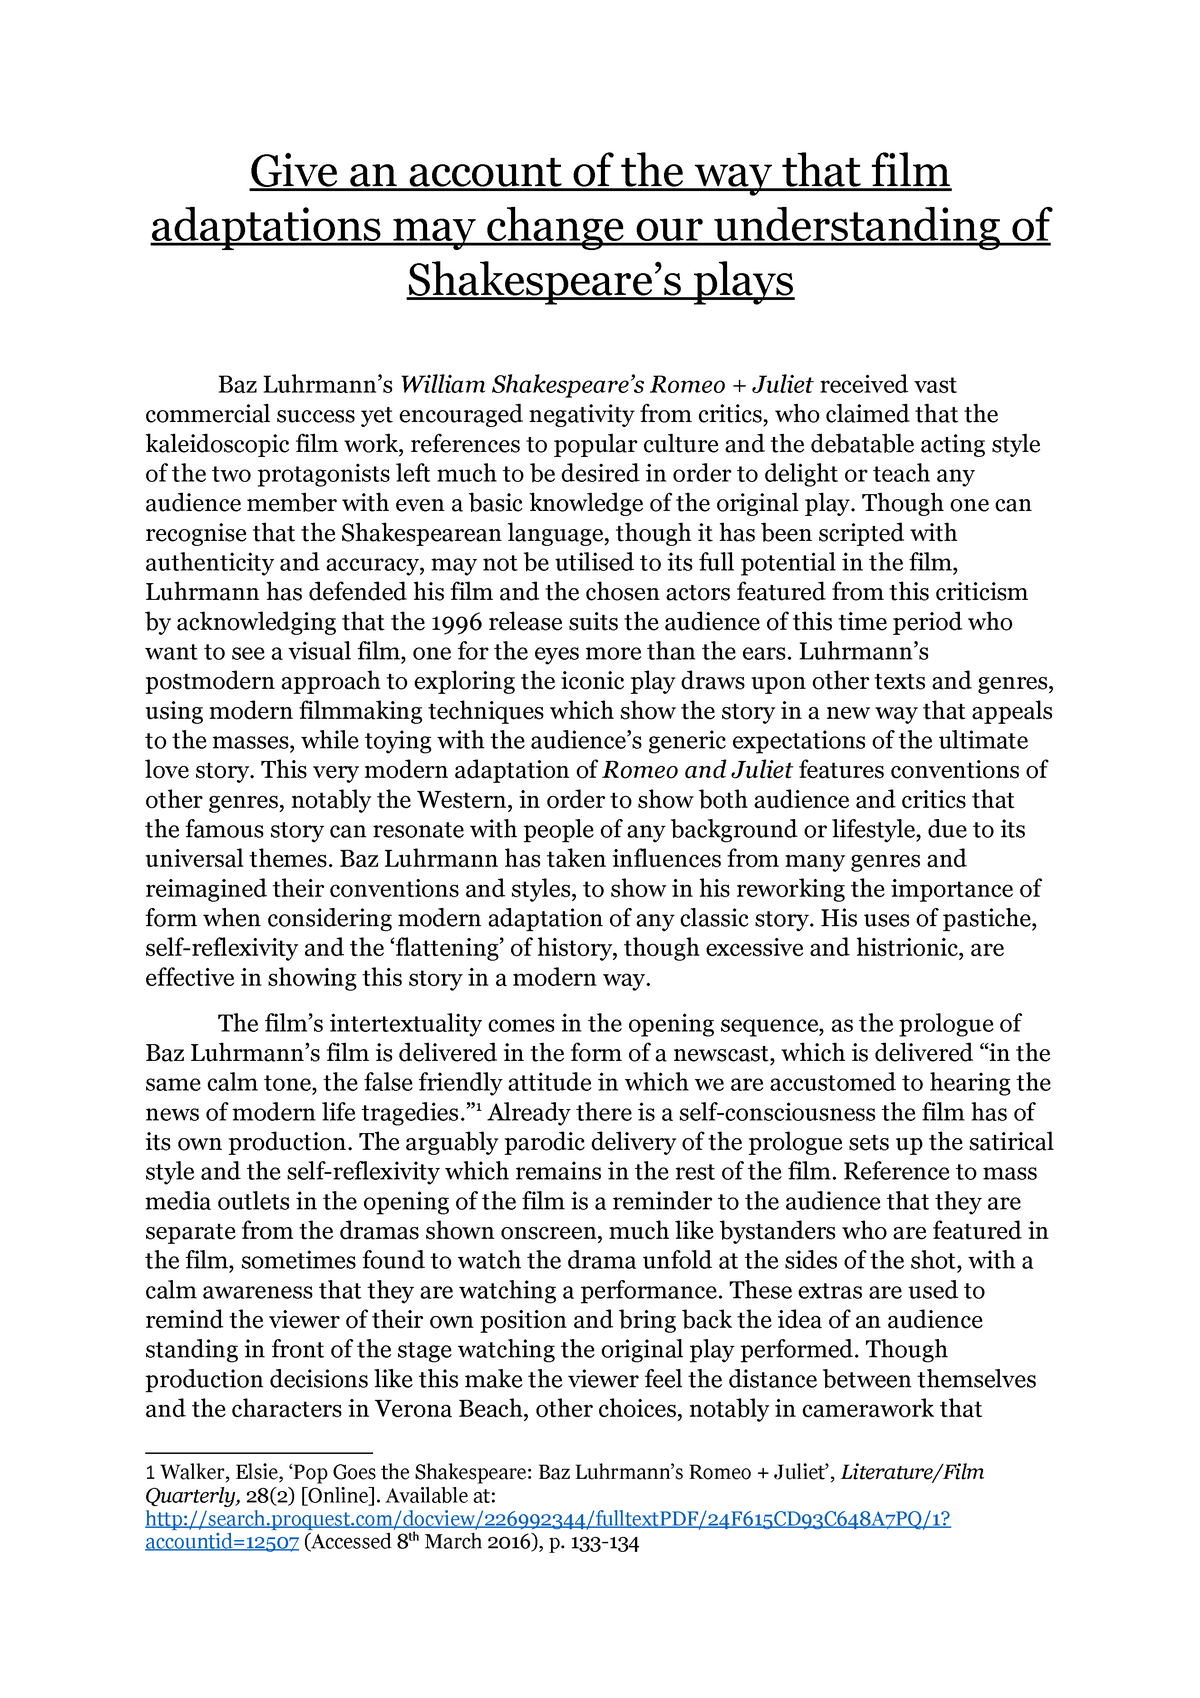 criticism of romeo and juliet by shakespeare